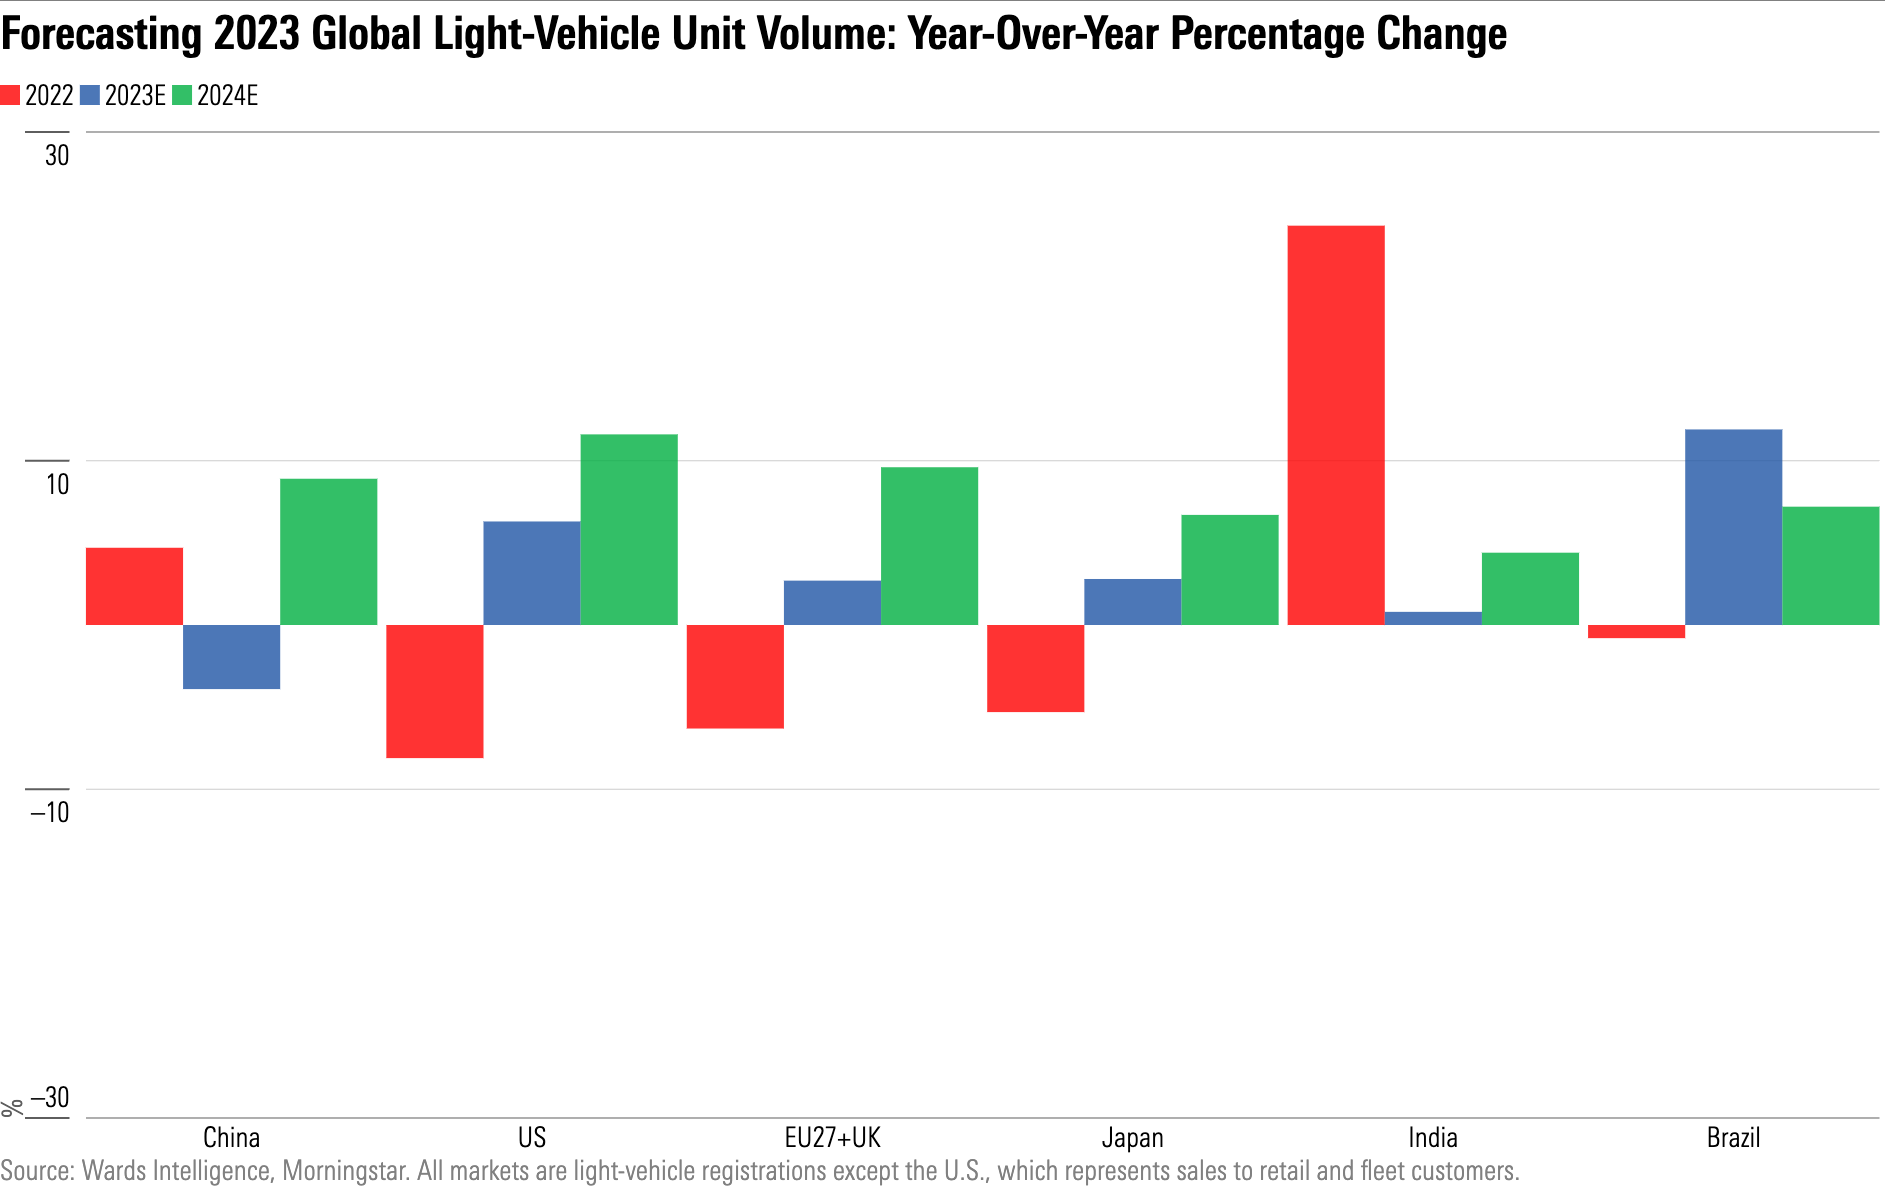 Bar chart showing year-over-year percentage change forecasts for light-vehicle demand in China, the U.S., Europe, Japan, India, and Brazil.